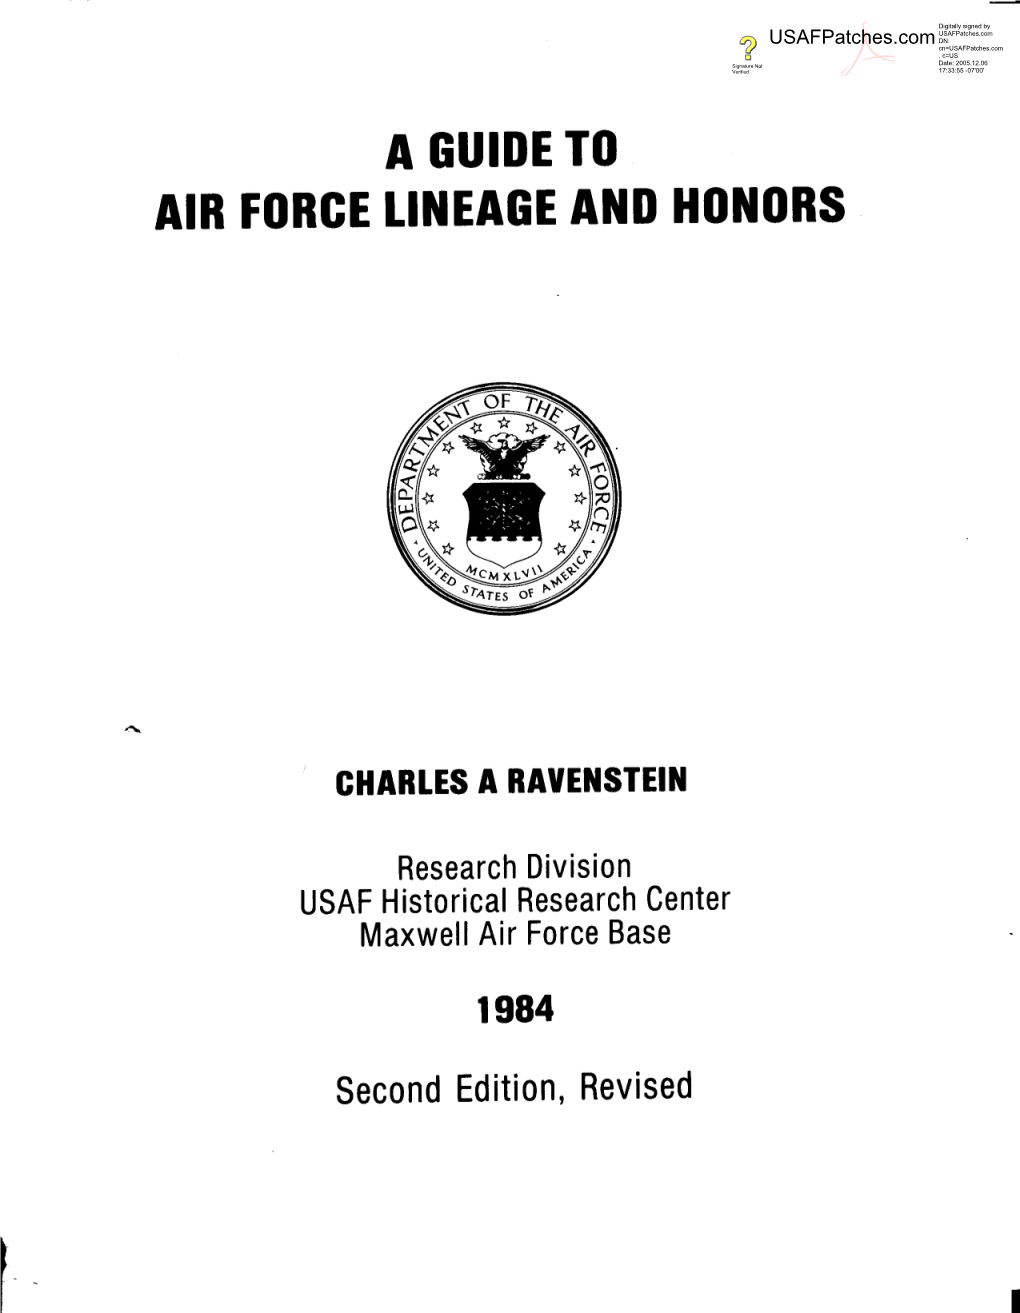 A Guideto Air Force Lineage and Honors